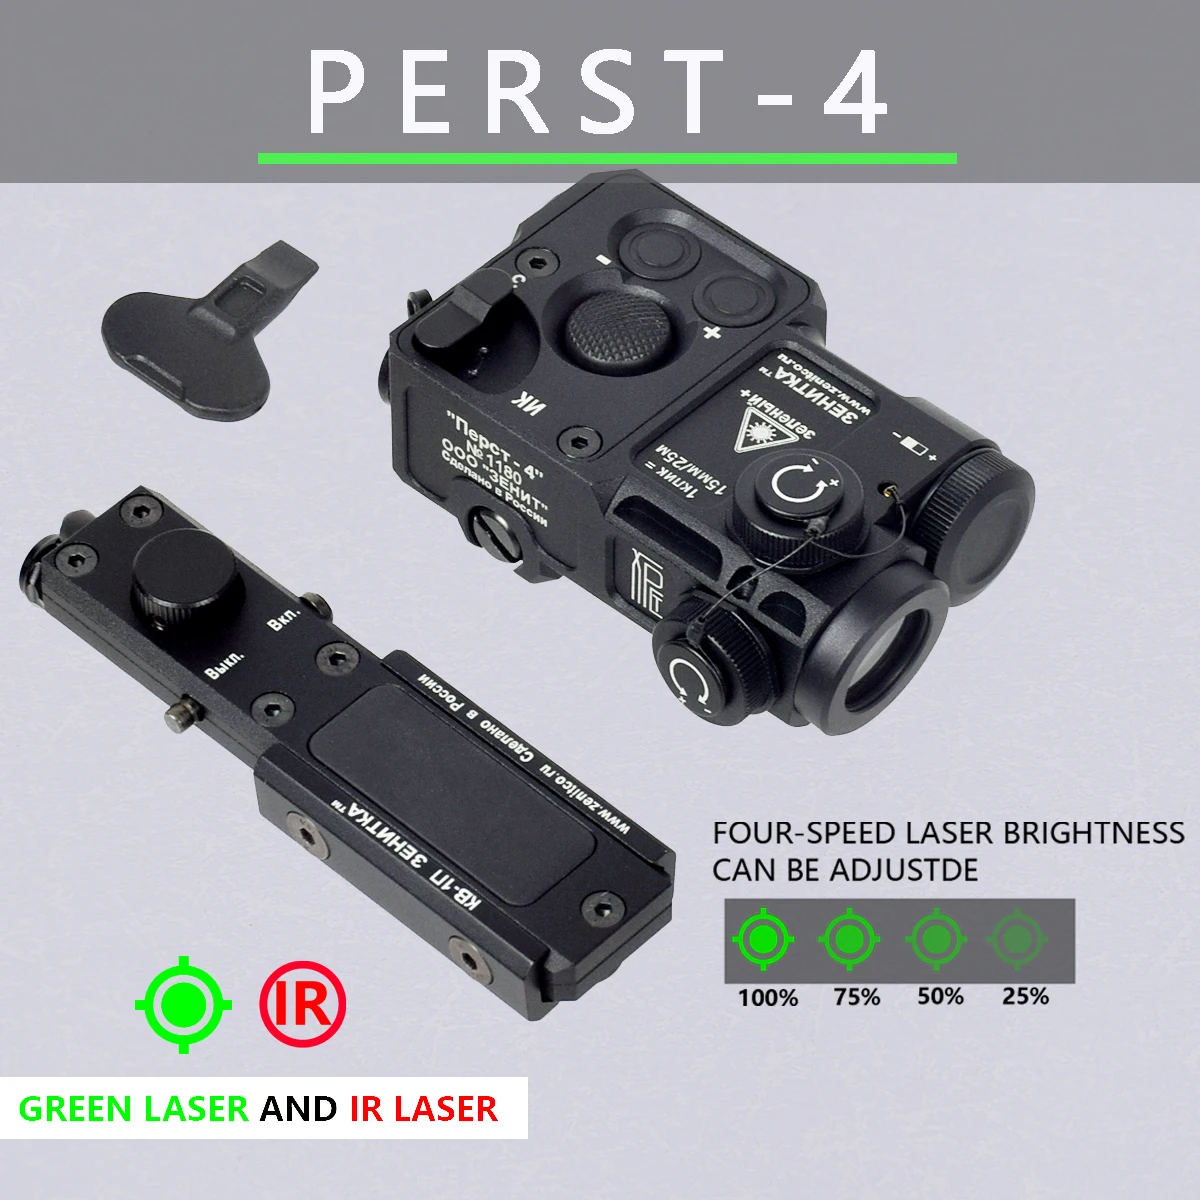 

Taciitcal Zenitco PERST 4 COMBINED DEVICE GEN.3.0 Green IR Laser Pointer DBAL PEQ NGAL MAWL AK47 AK74 ar15 Metal Accessories